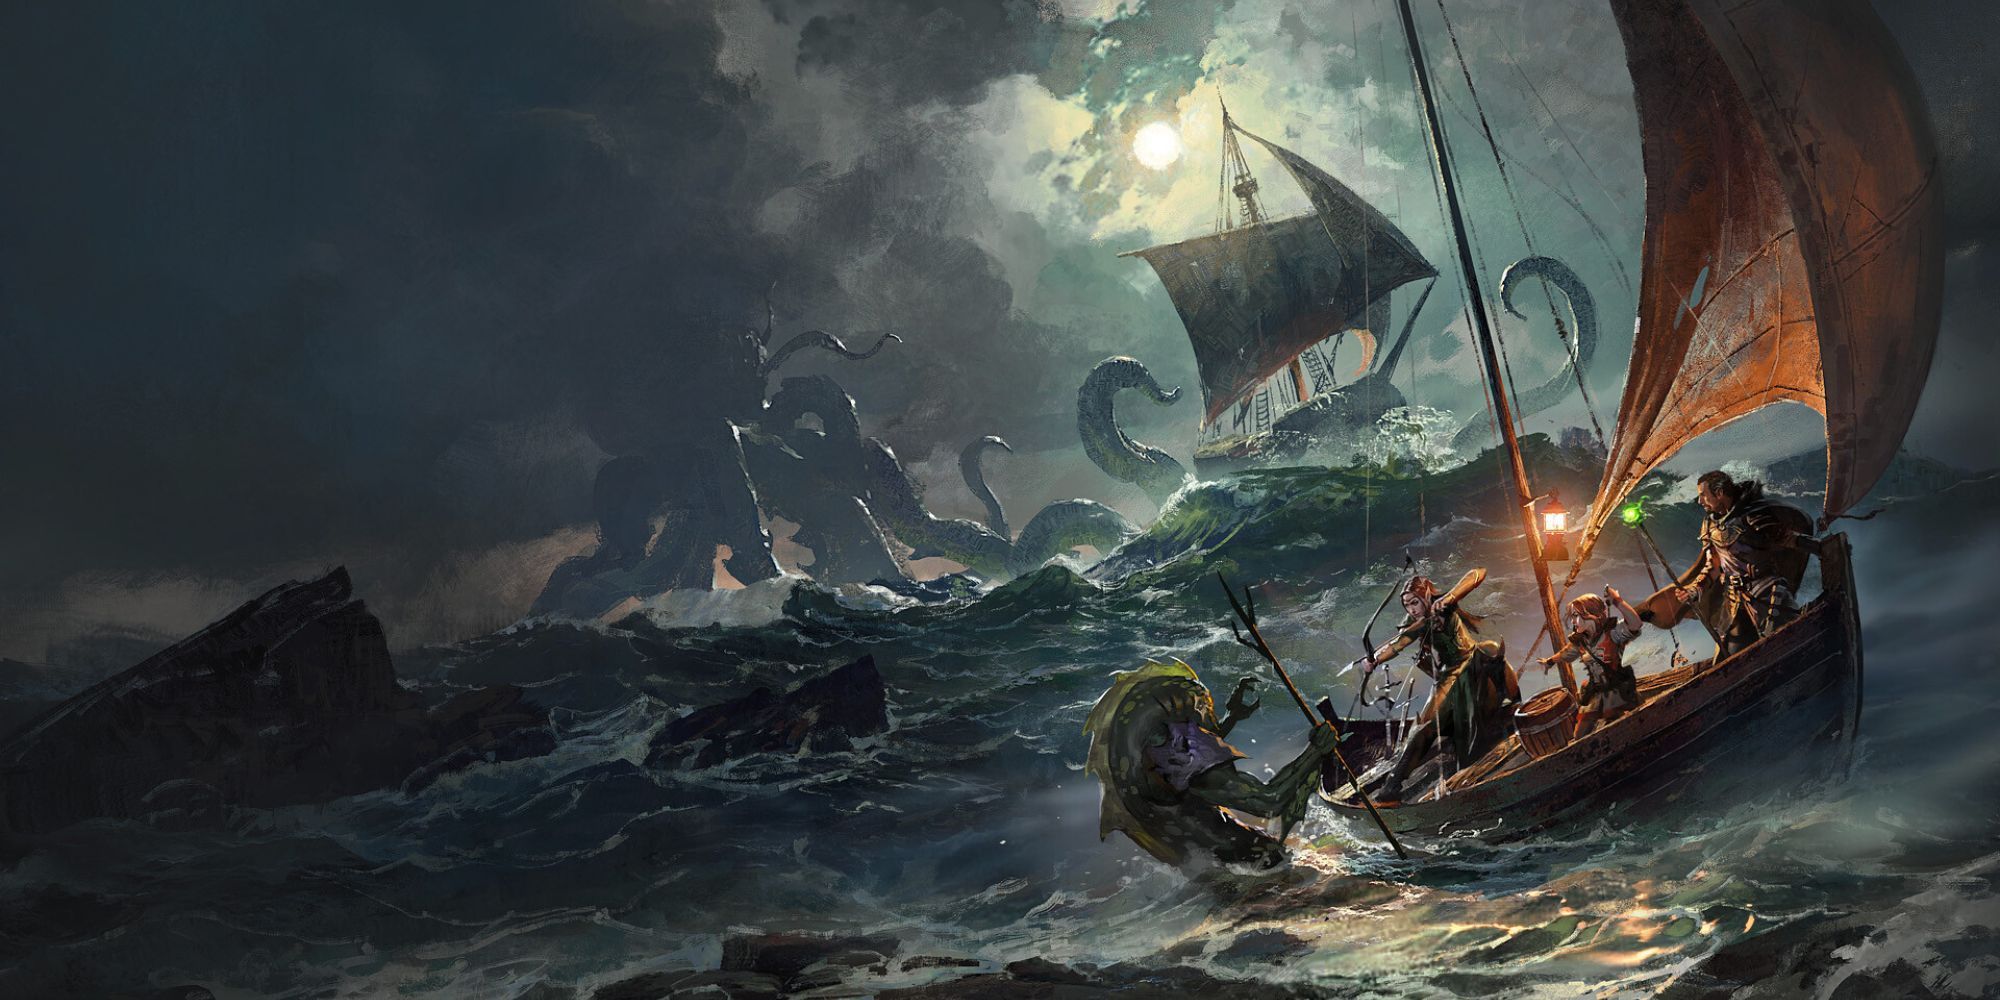 Dungeons And Dragons - Ghosts Of Saltmarsh Cover Art of boats being attacked by sea beasts